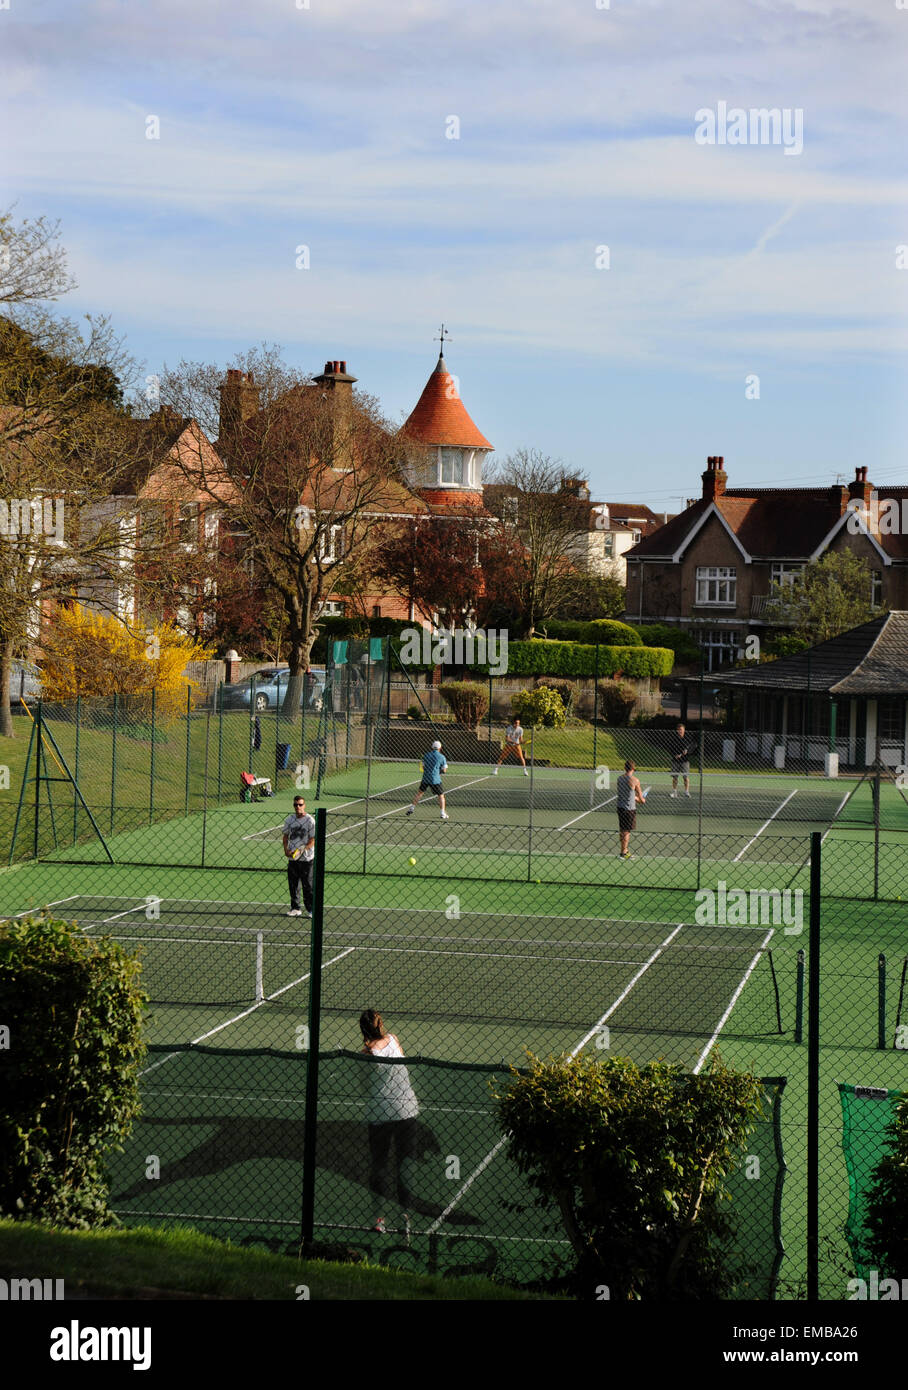 Brighton Sussex UK 19th April 2015 - Tennis players enjoy the lovely weather on the Queens Park courts in Brighton this afternoon Photograph taken by Simon Dack/Alamy Live News Stock Photo